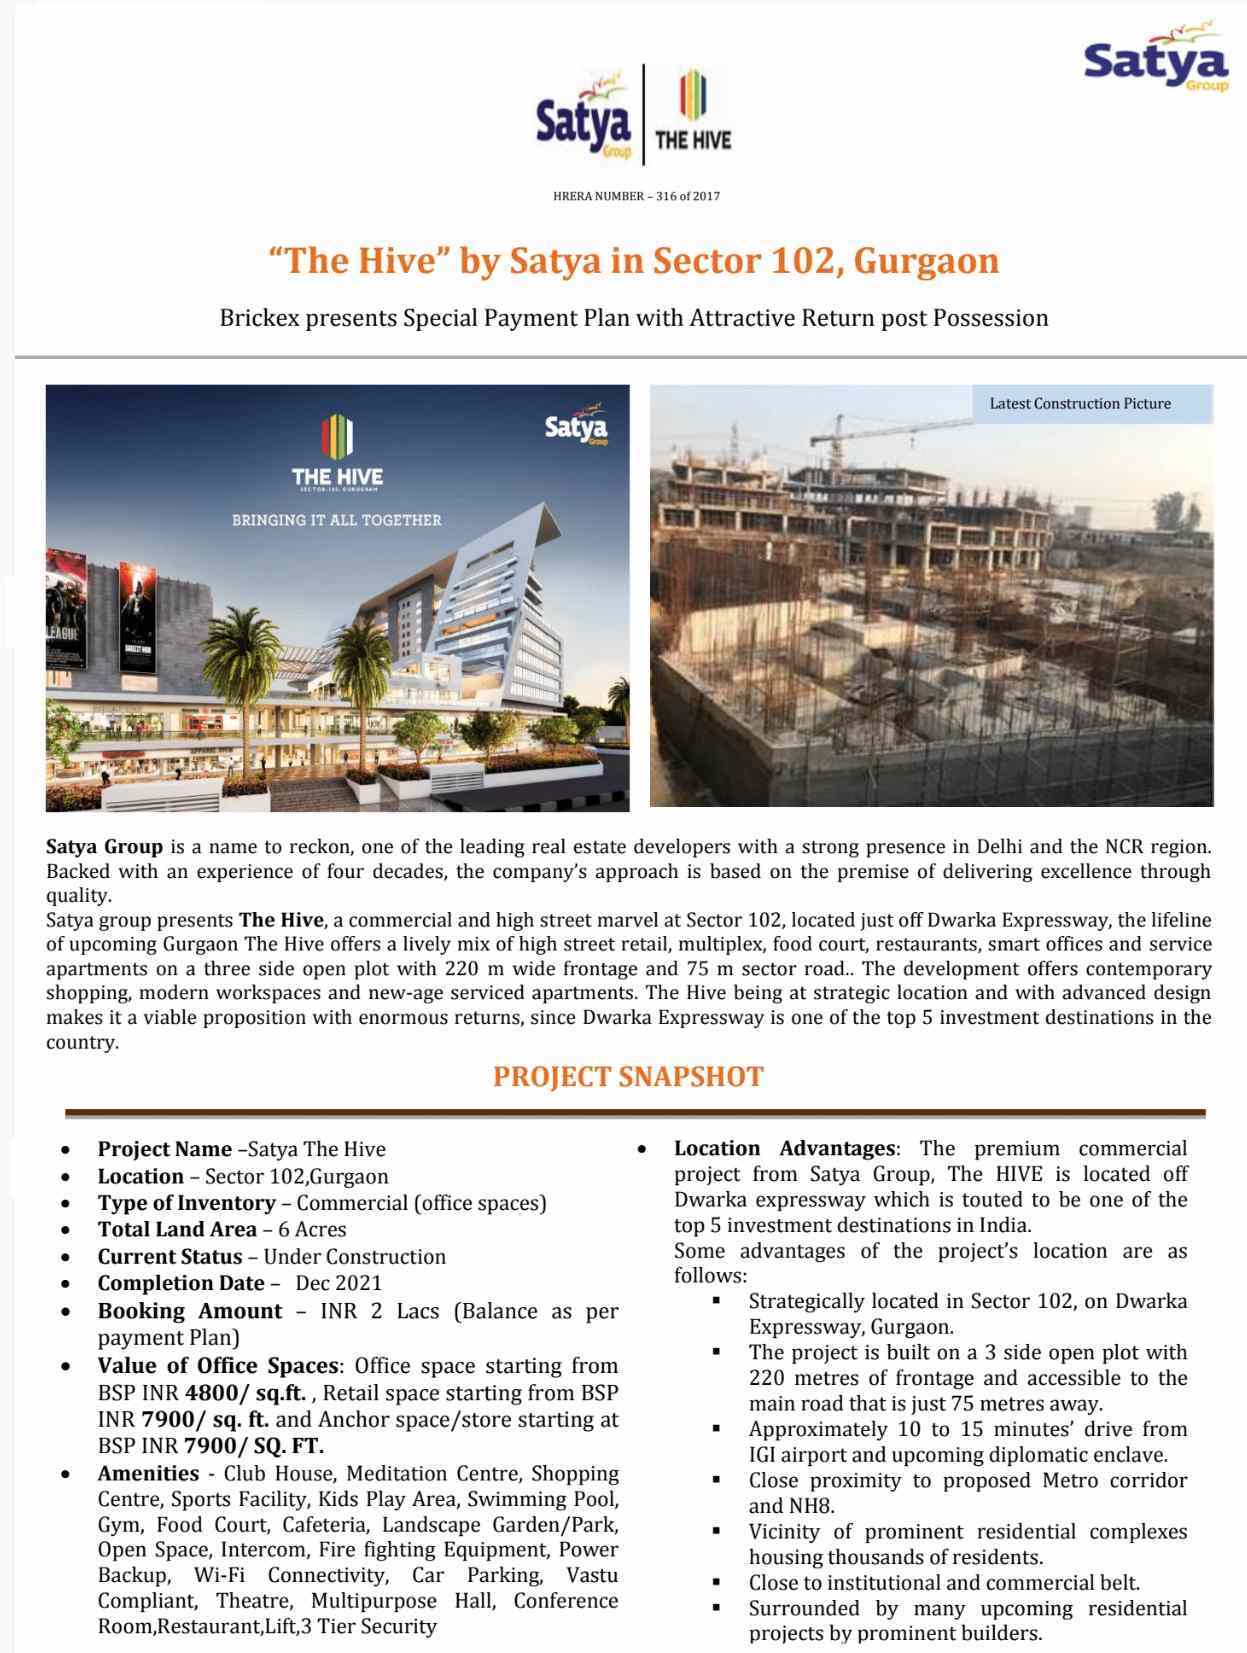 Presenting special payment plan with attractive return post possession at Satya The Hive in Gurgaon Update